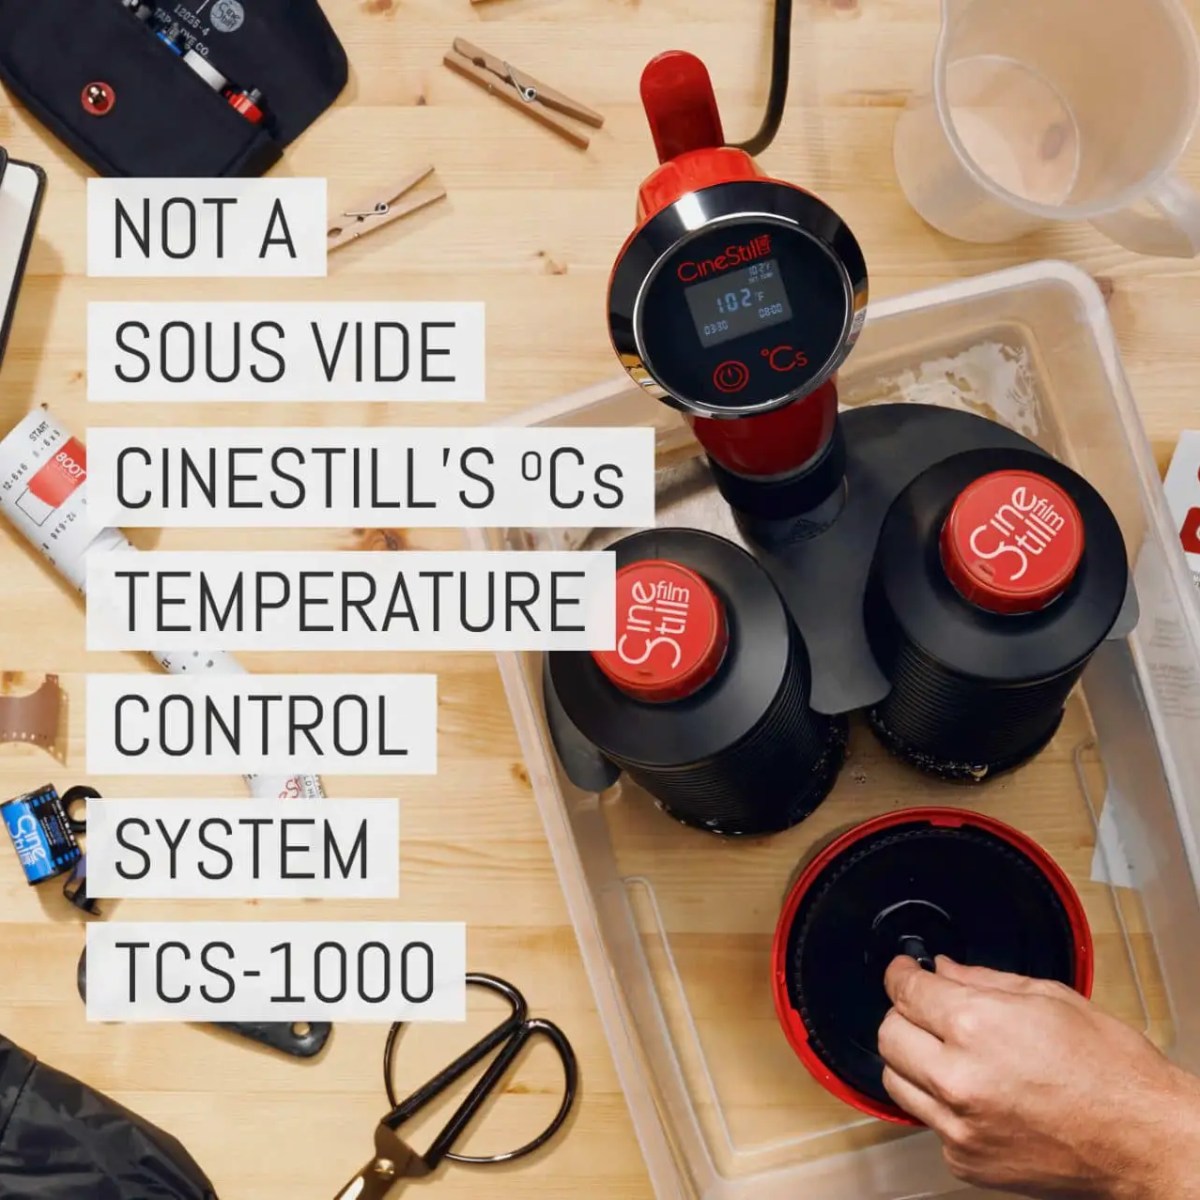 Cover - Not a sous vide cooker: Cinestill's ºCs “Temperature Control System” for simple film development at home